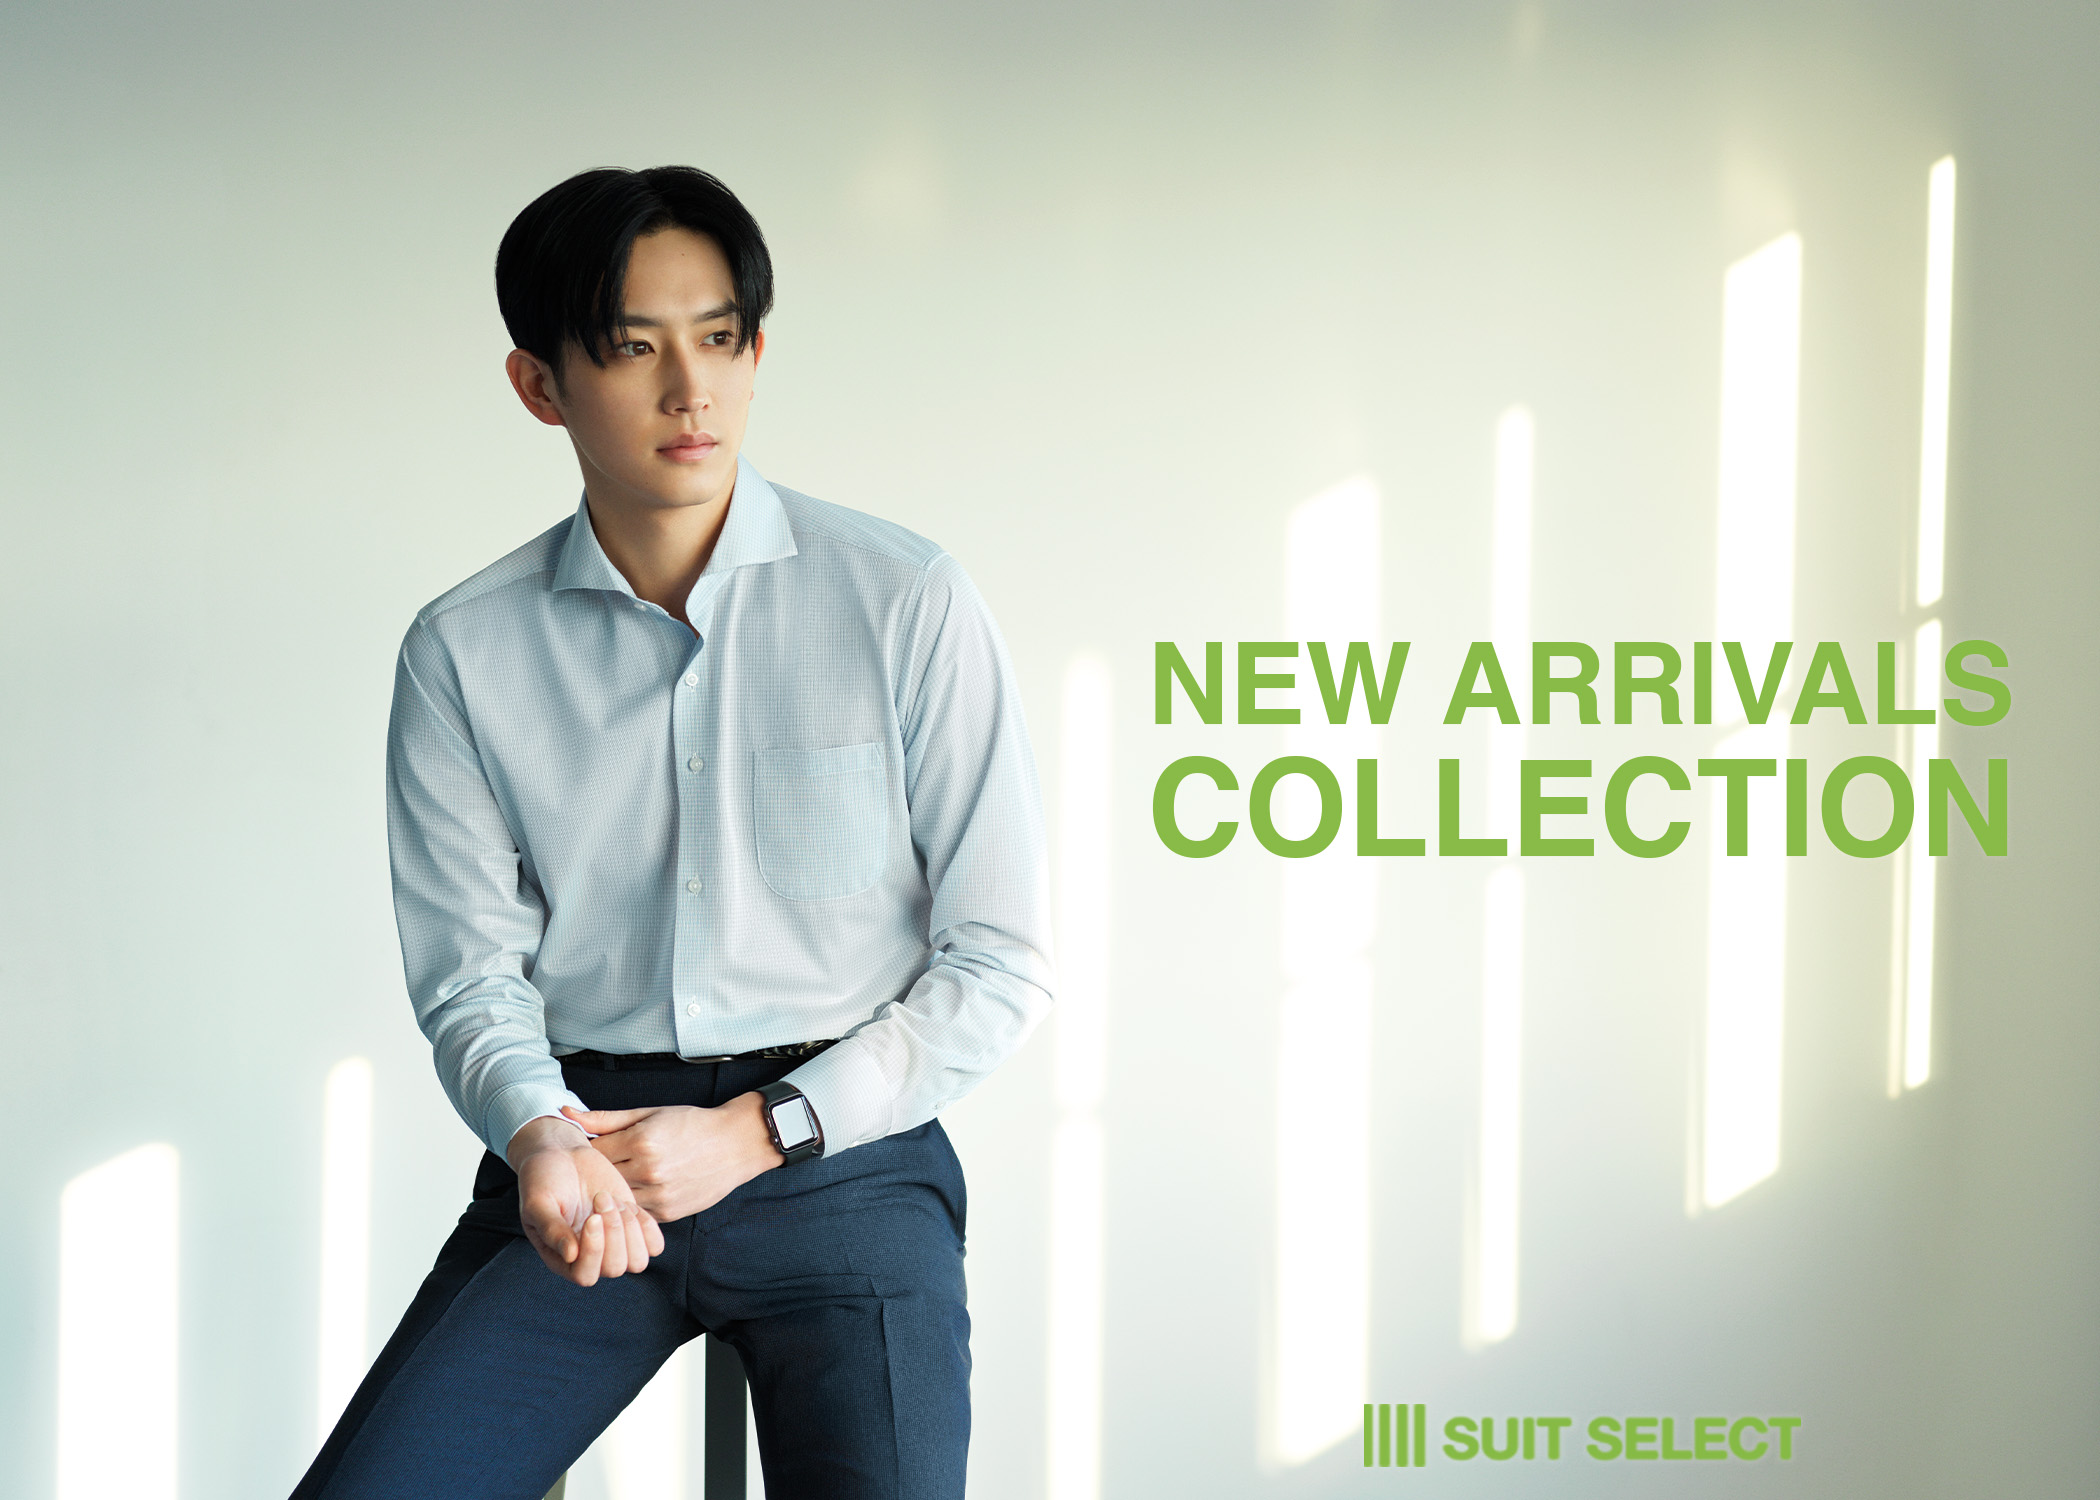 NEW ARRIVALS COLLECTION